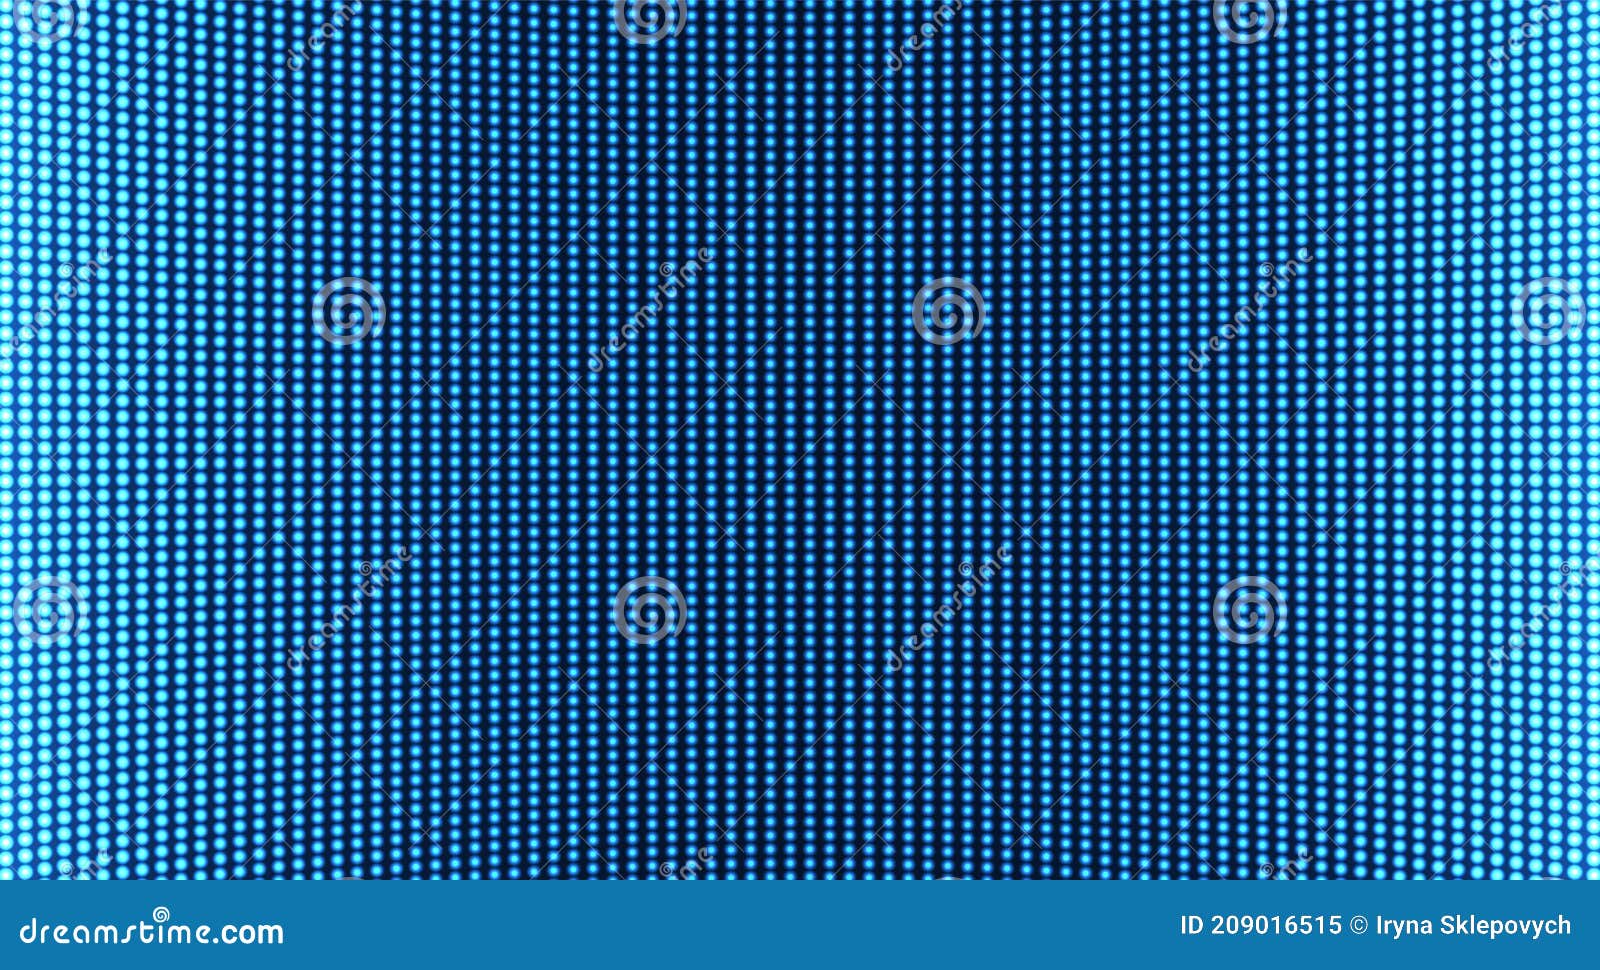 Led Screen Texture. Lcd Display with Dots. Digital Pixel Monitor